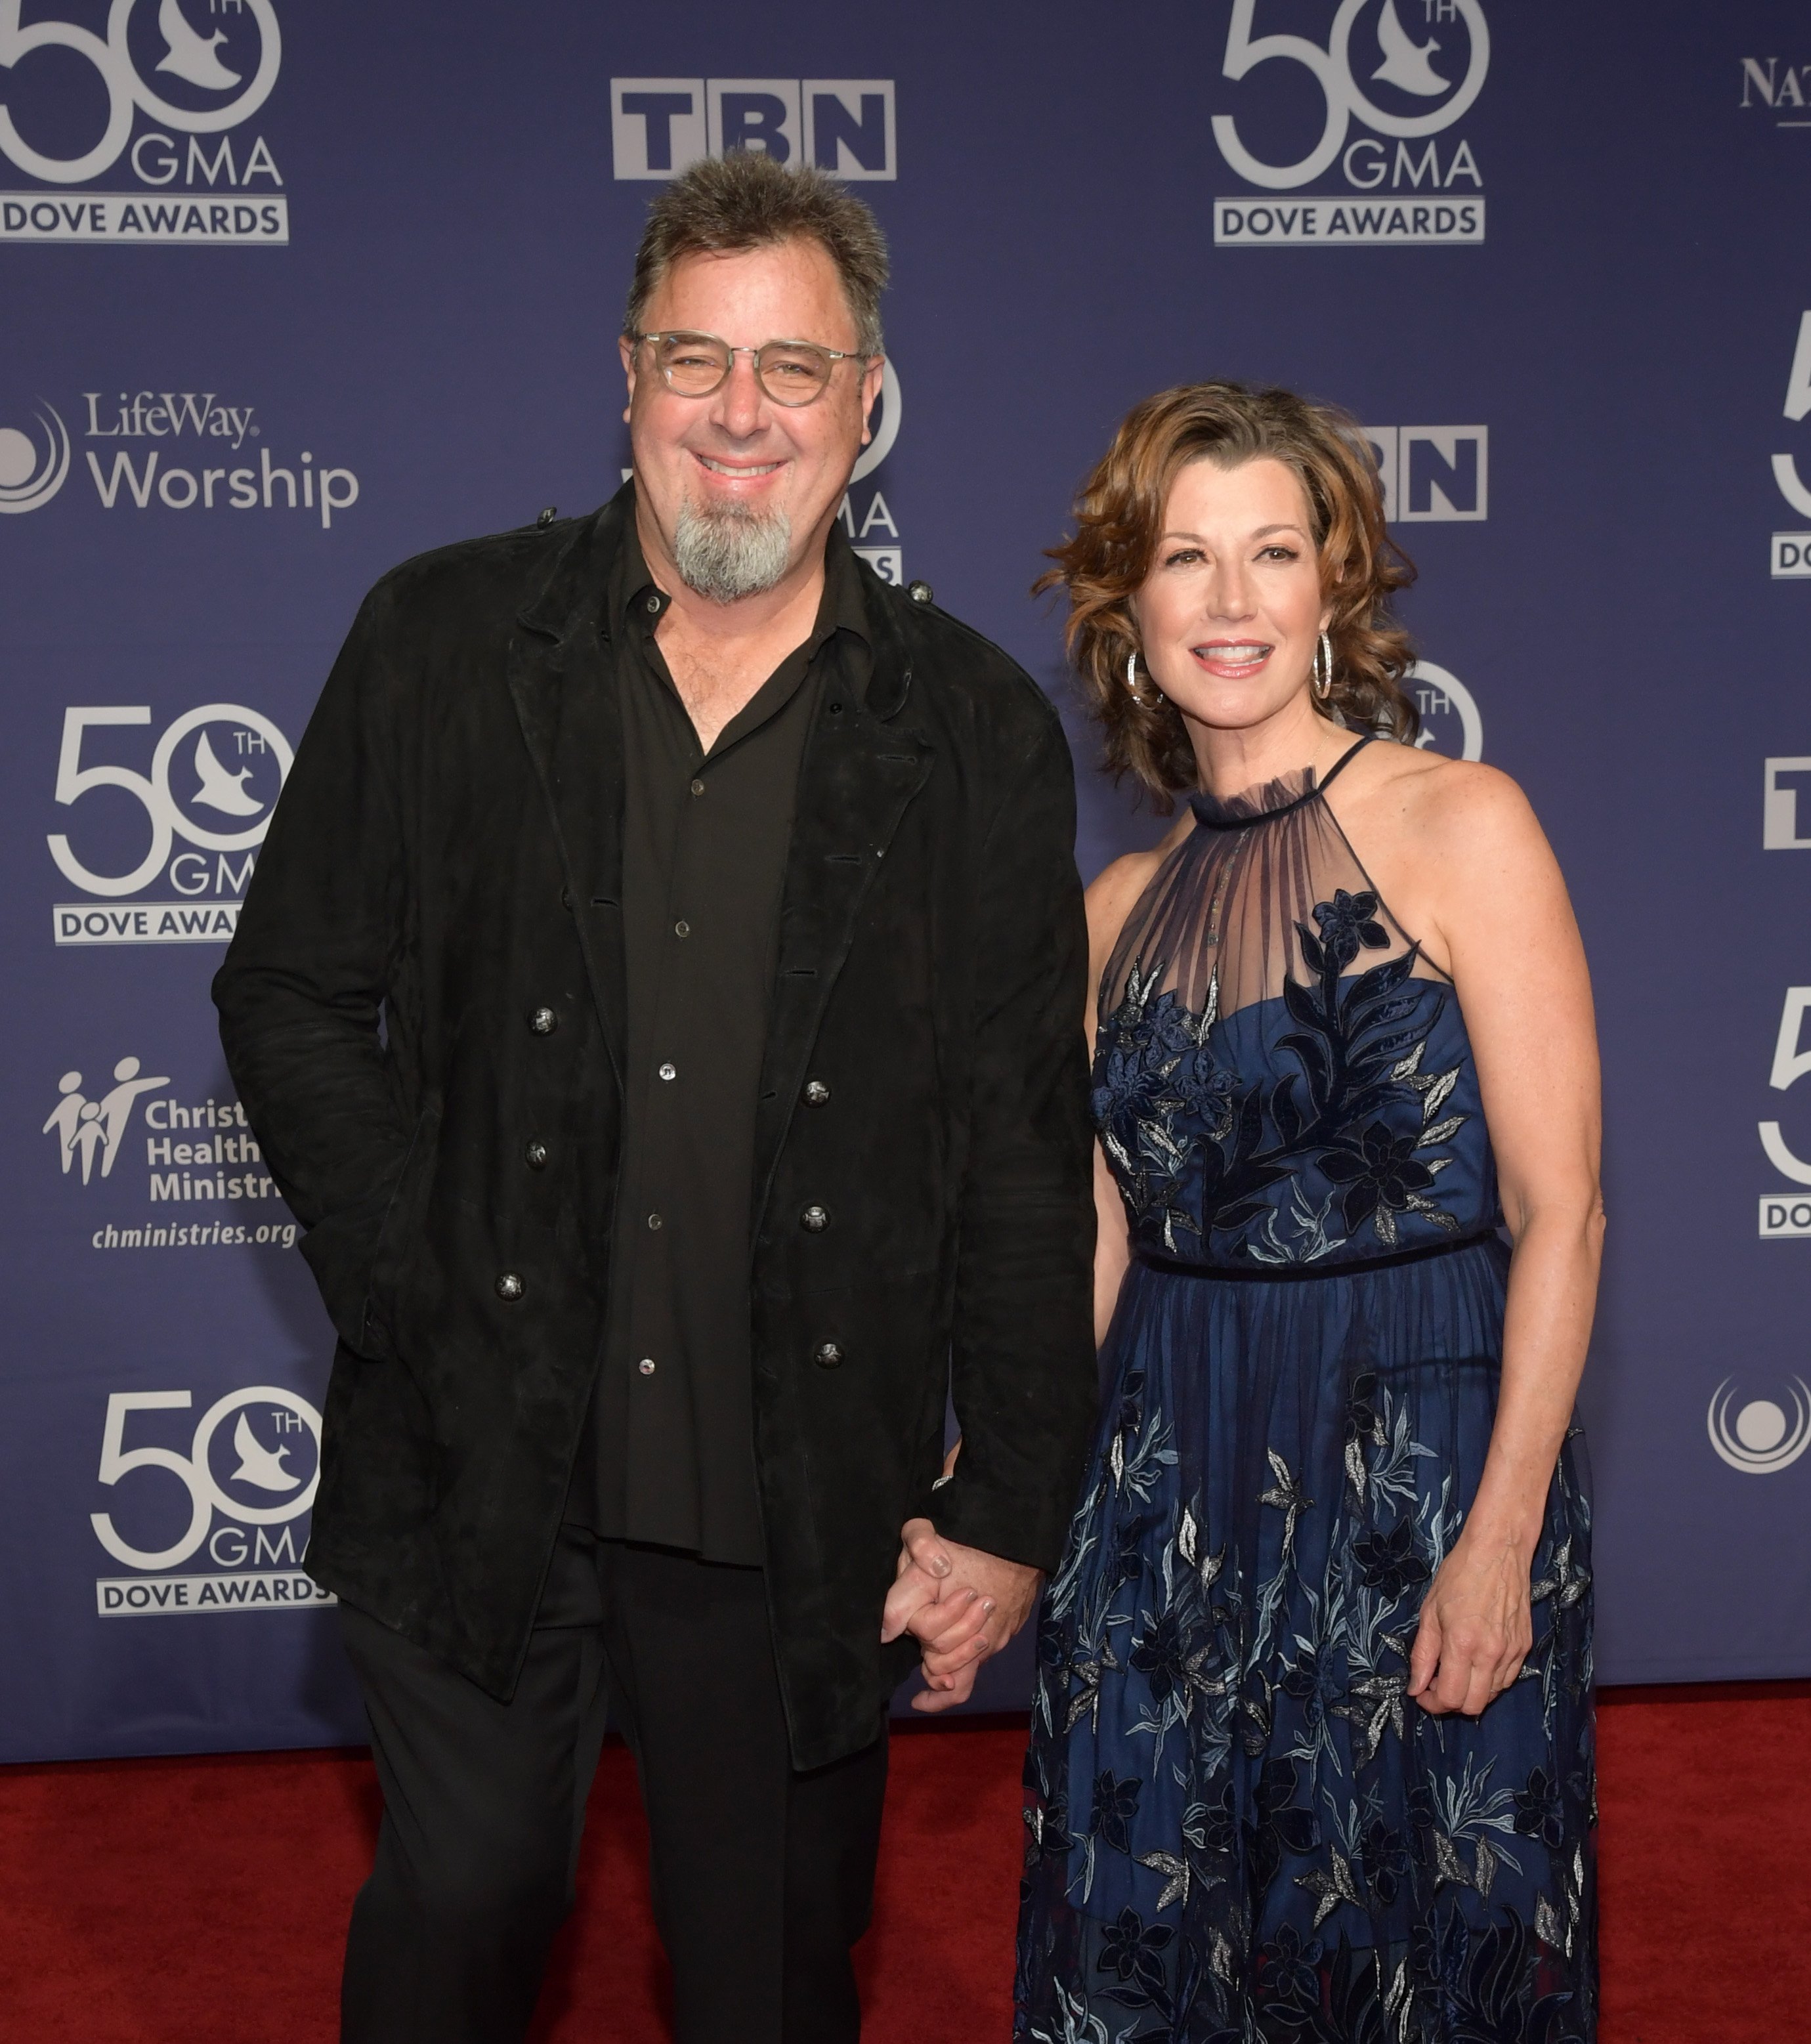 Vince Gill and Amy Grant at the 50th Annual GMA Dove Awards on October 15, 2019 | Source: Getty Images